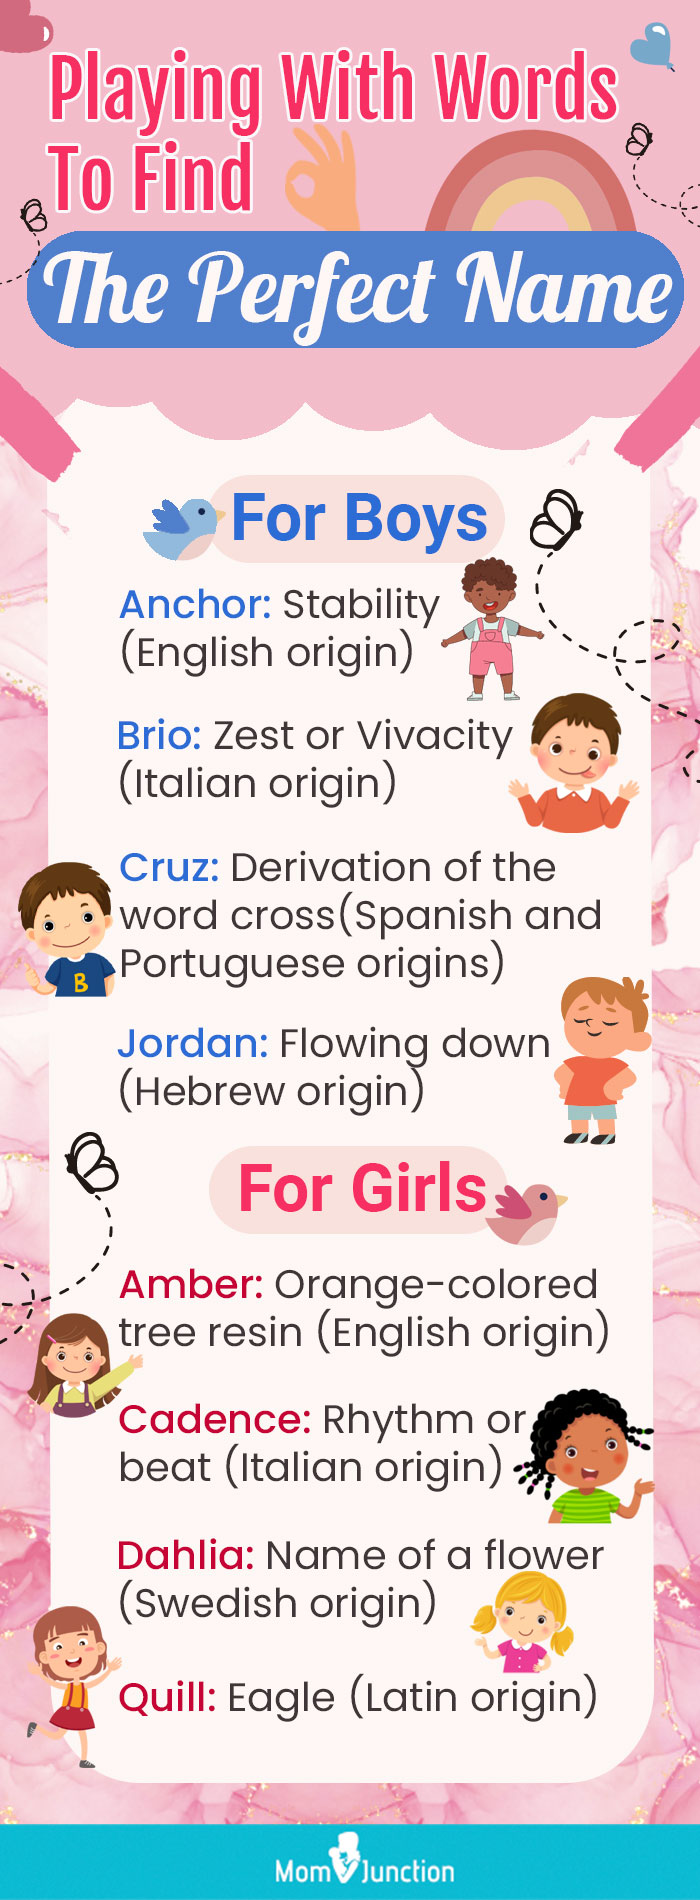 playing with words to find the perfect name (infographic)